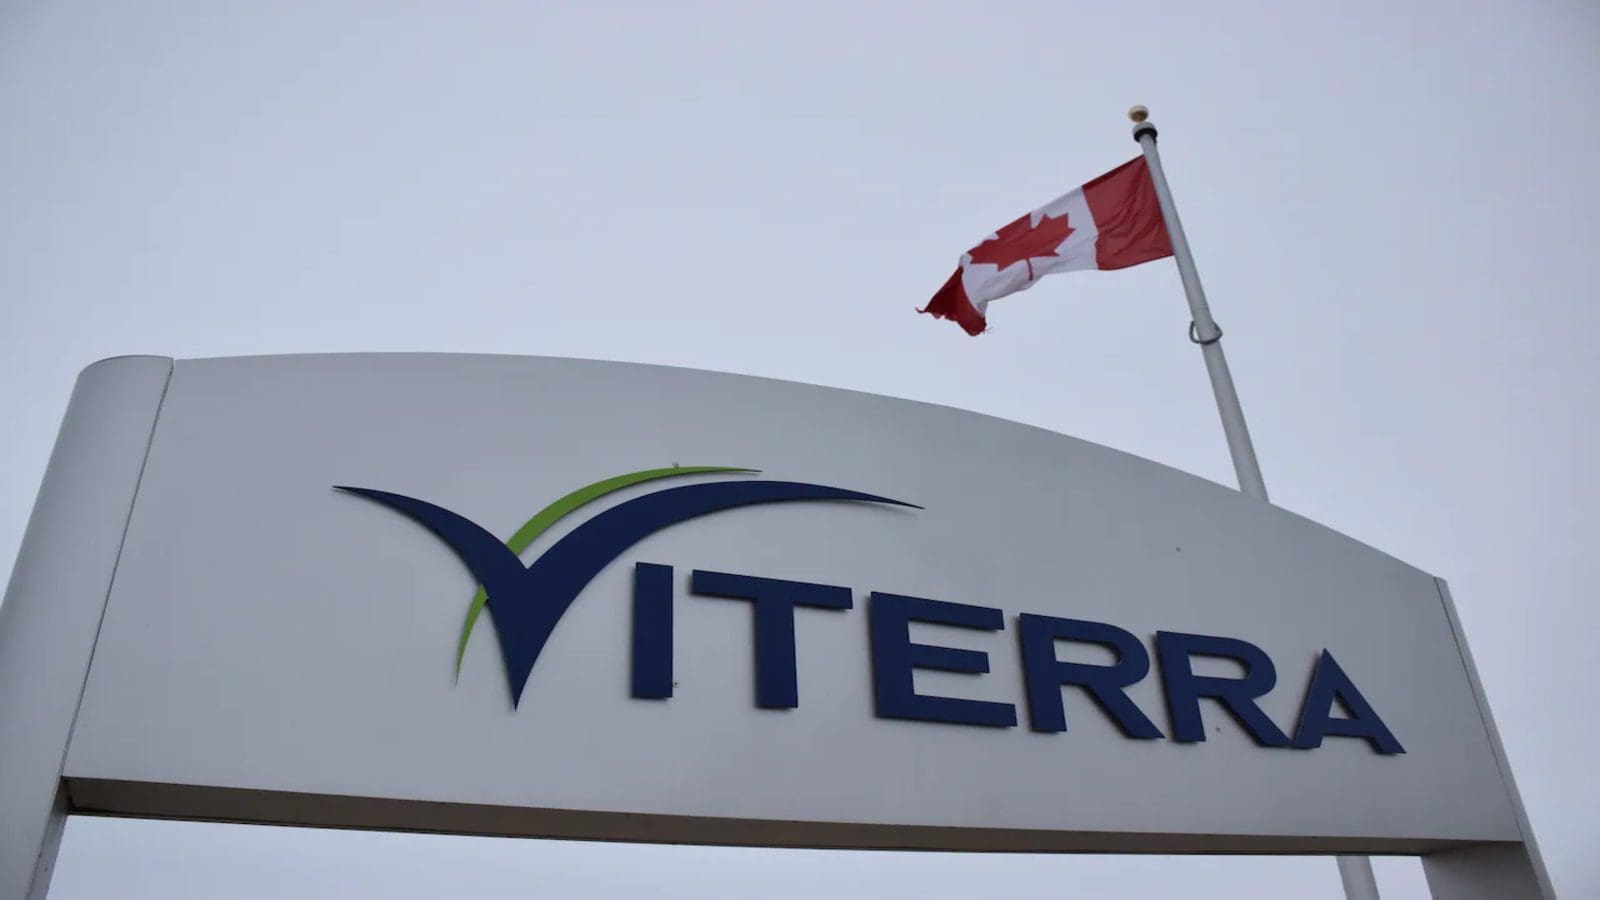 Viterra Canada and grain union successfully ratify revised contract